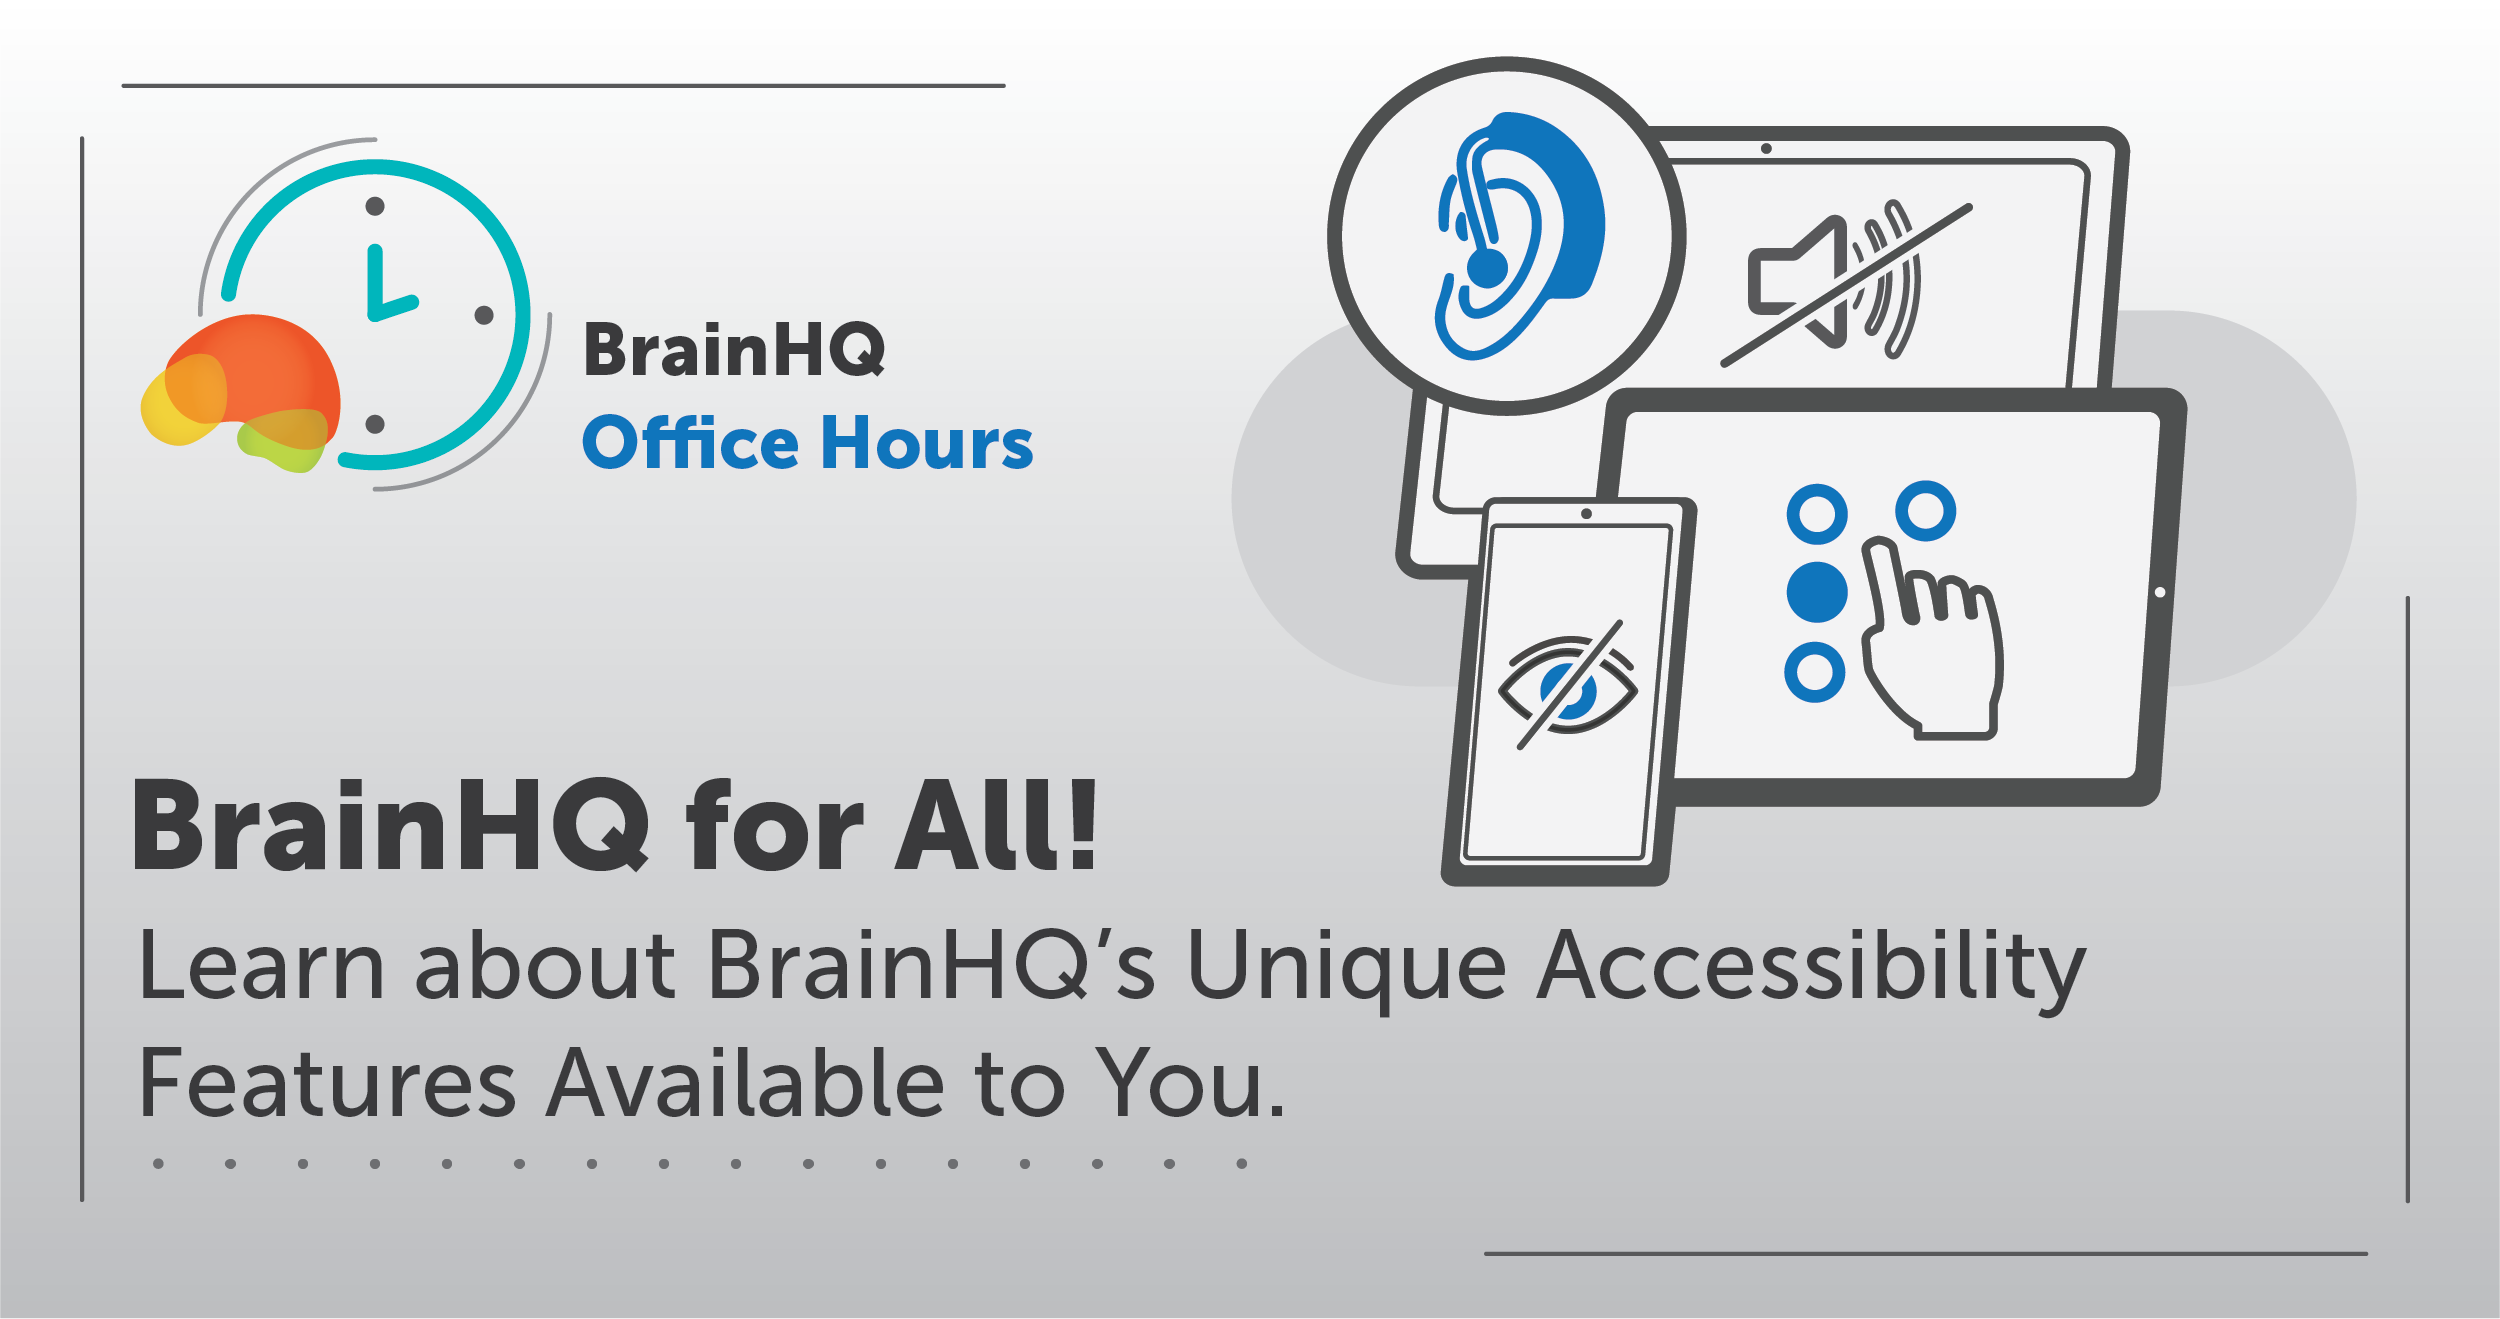 BrainHQ for All! Learn About BrainHQ’s Accessibility Features